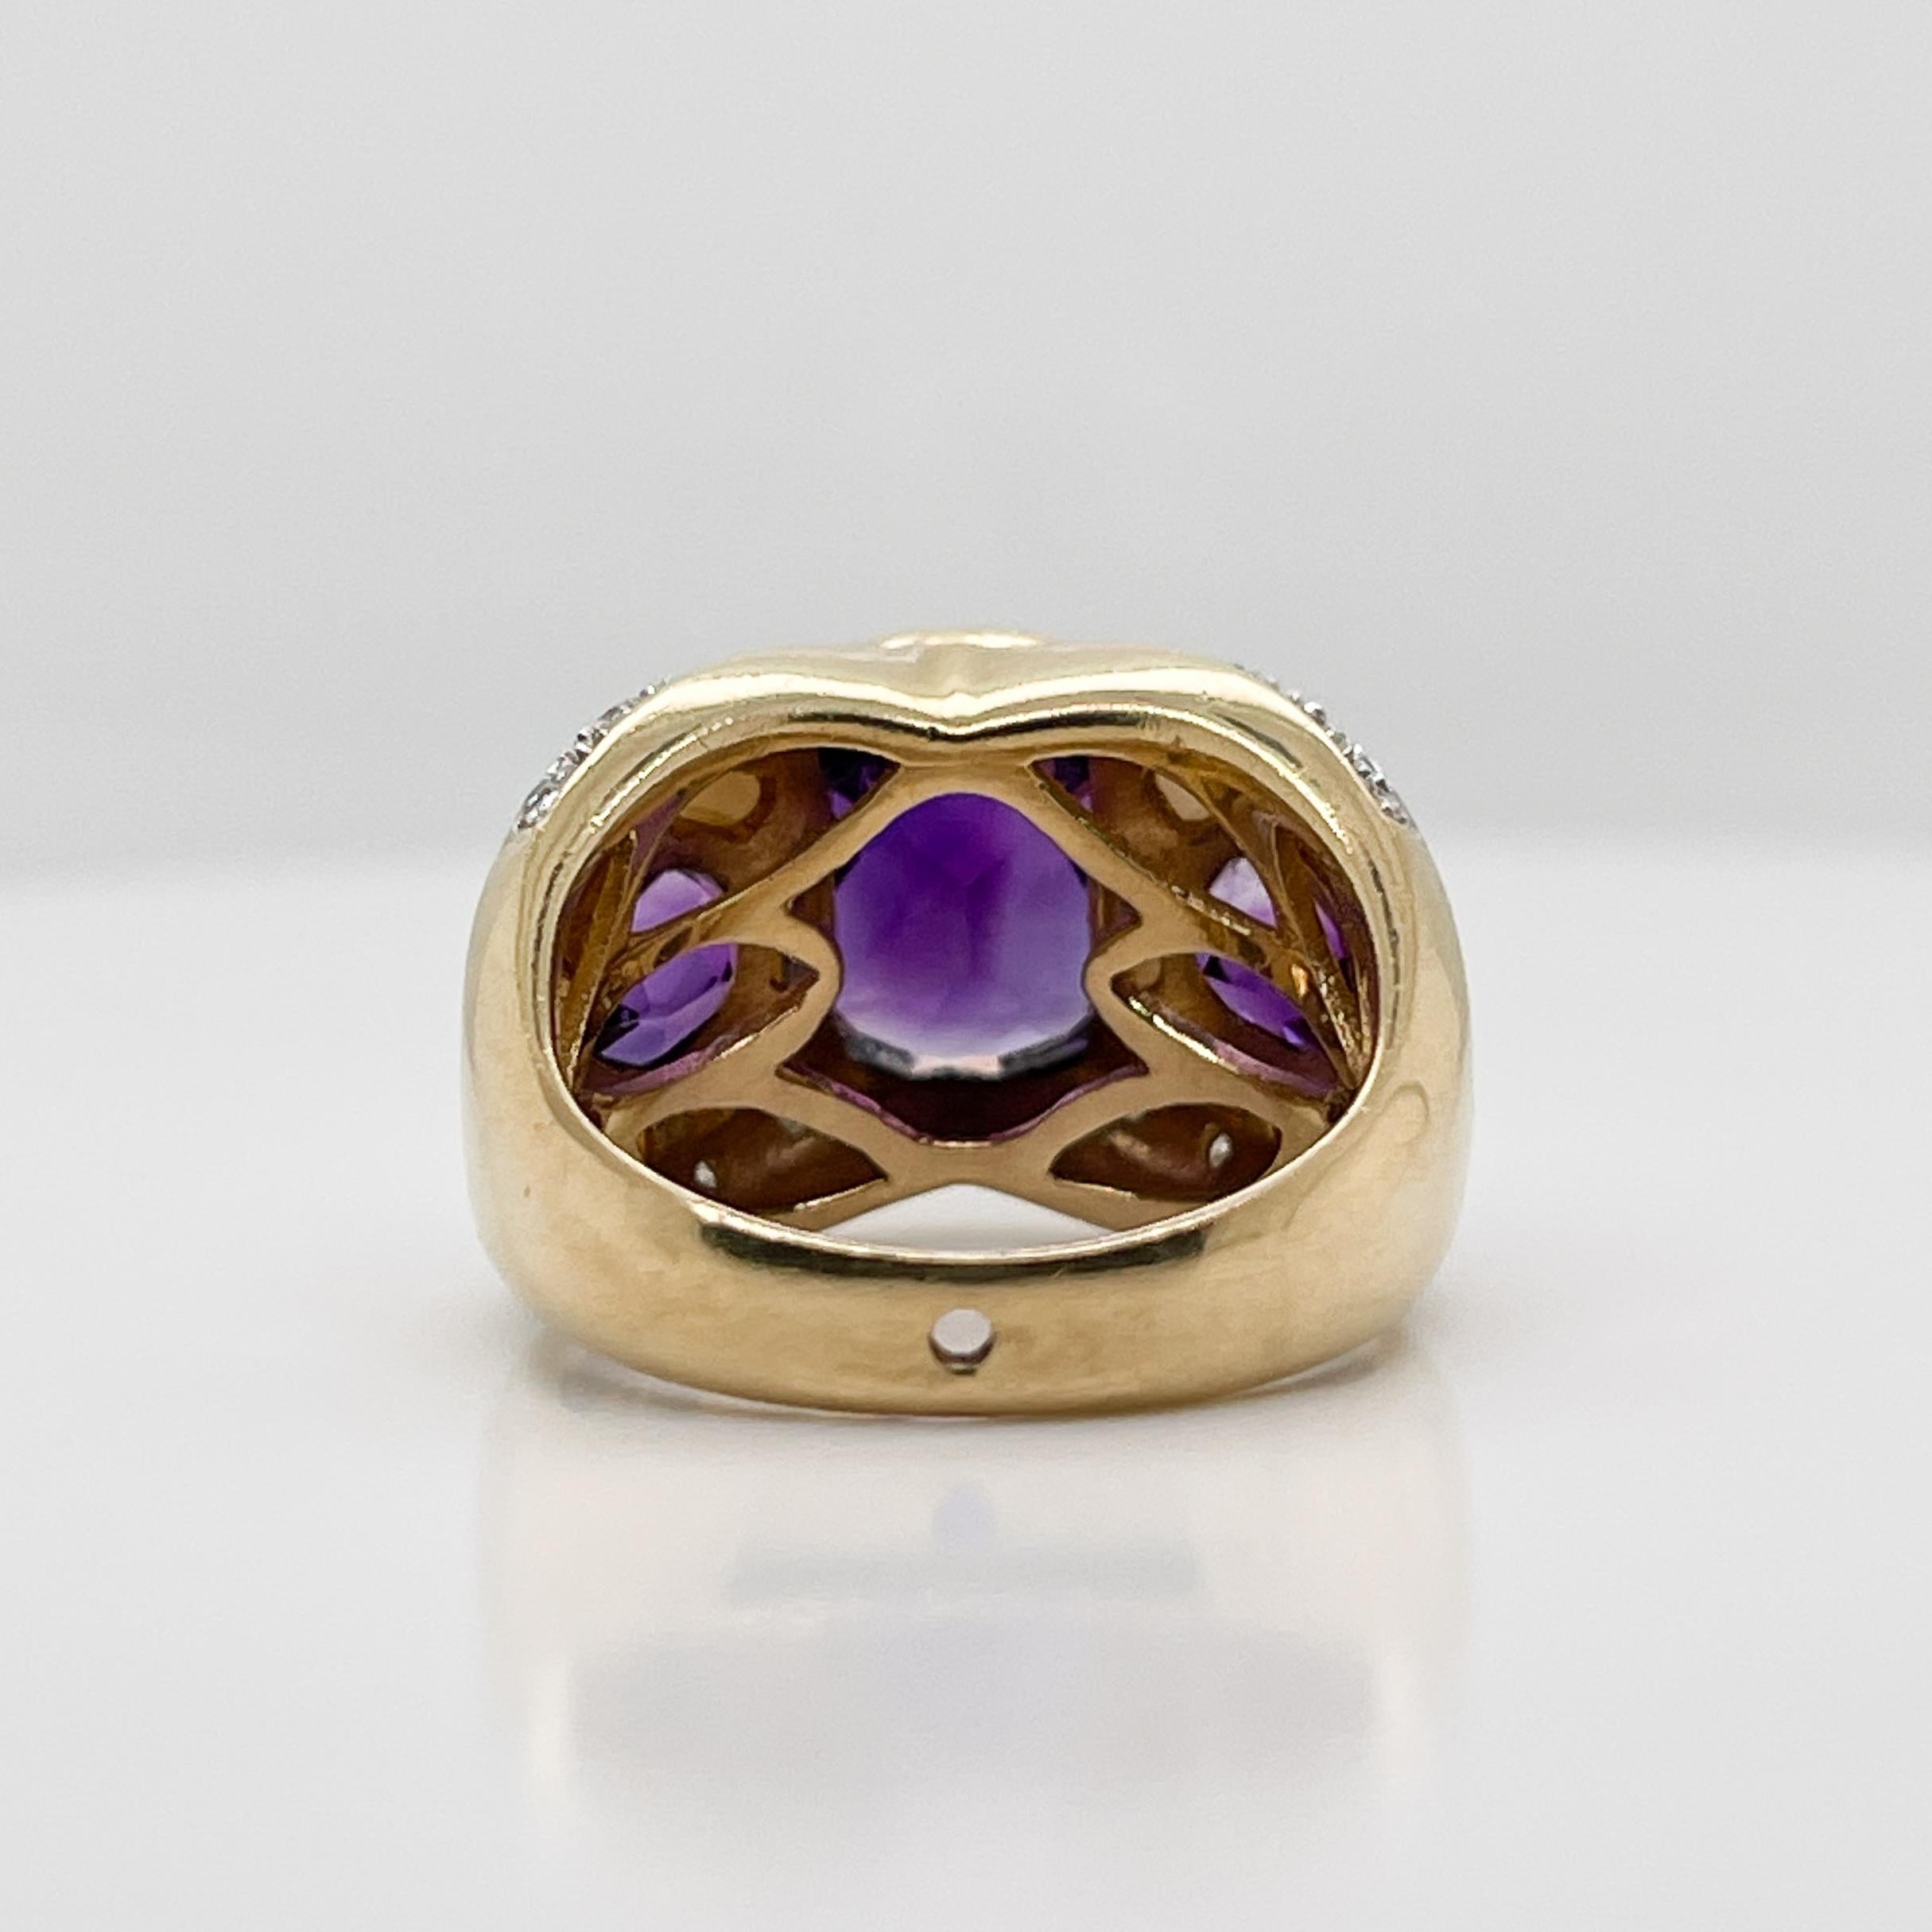 Owl/Parrot Bird Cocktail Ring in 18k Gold, Mother of Pearl, Diamond & Amethyst For Sale 2